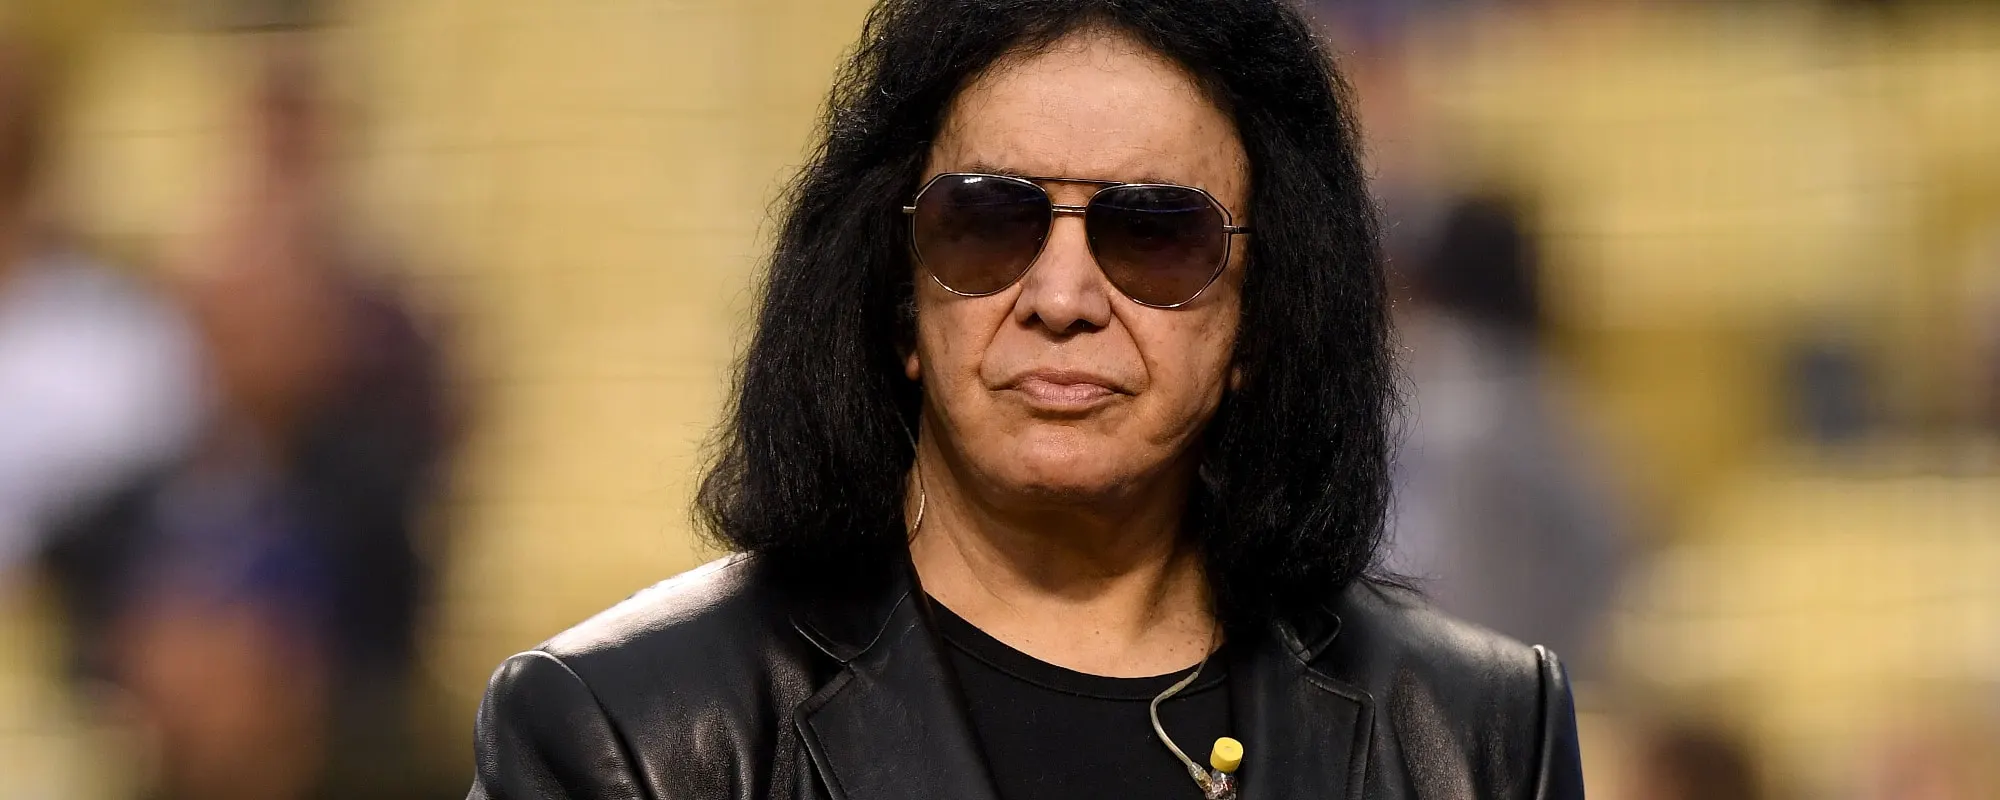 Gene Simmons Talks KISS Reality Show and More in Wide-Ranging New Interview